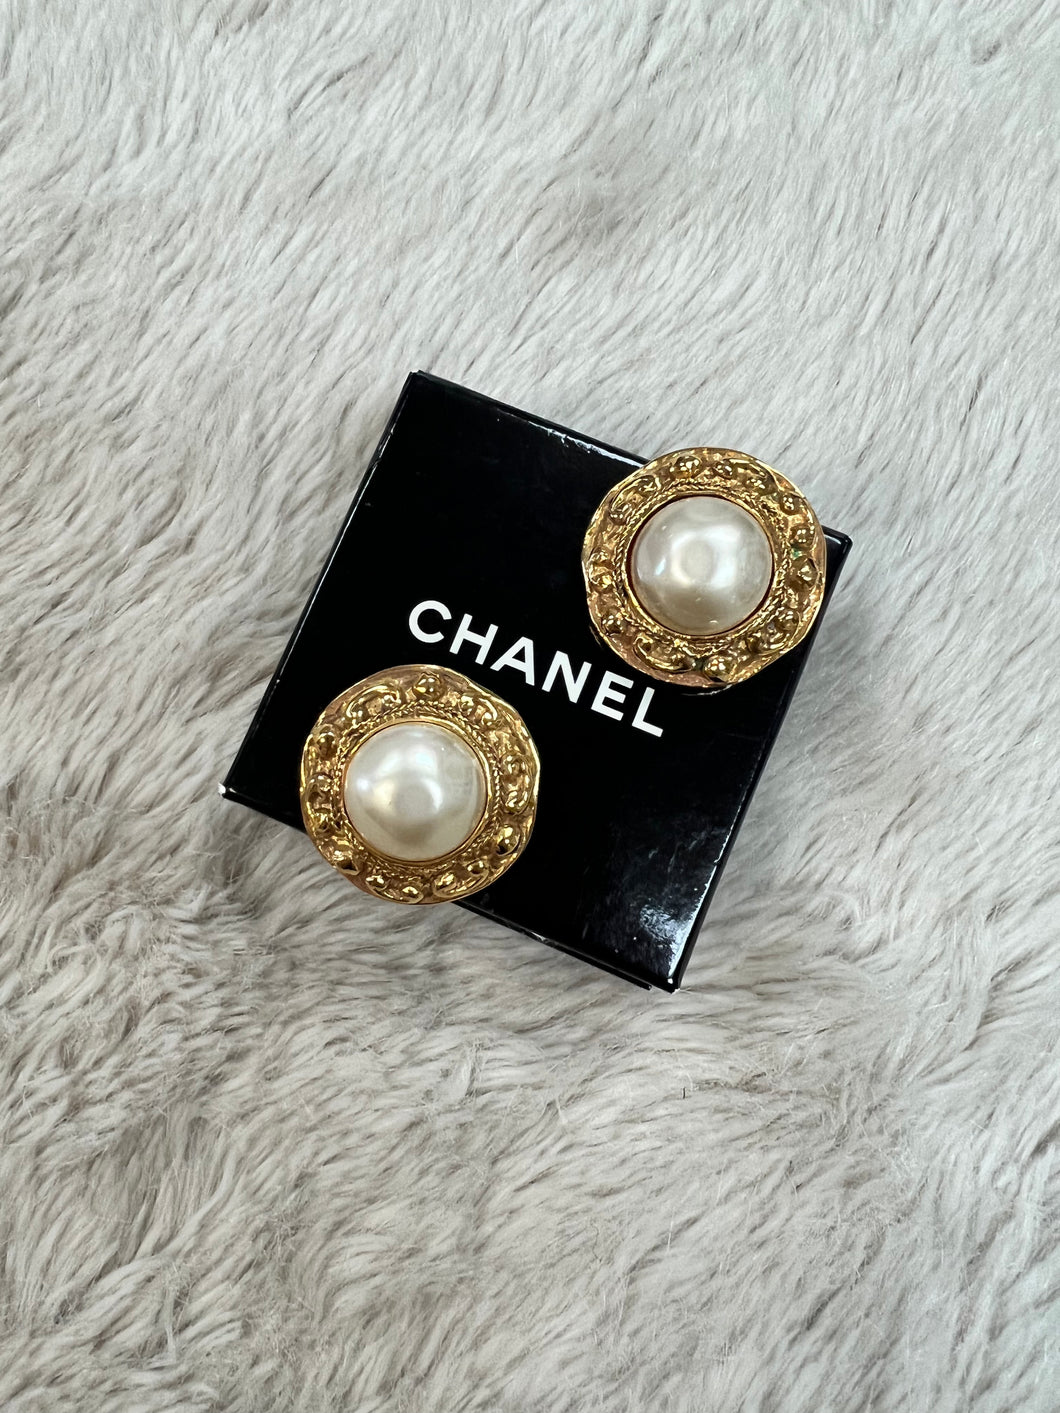 Chanel Vintage Goldtone and Faux Pearl Clip-On Earrings  Gold round  earrings, Small gold hoop earrings, Clip on earrings